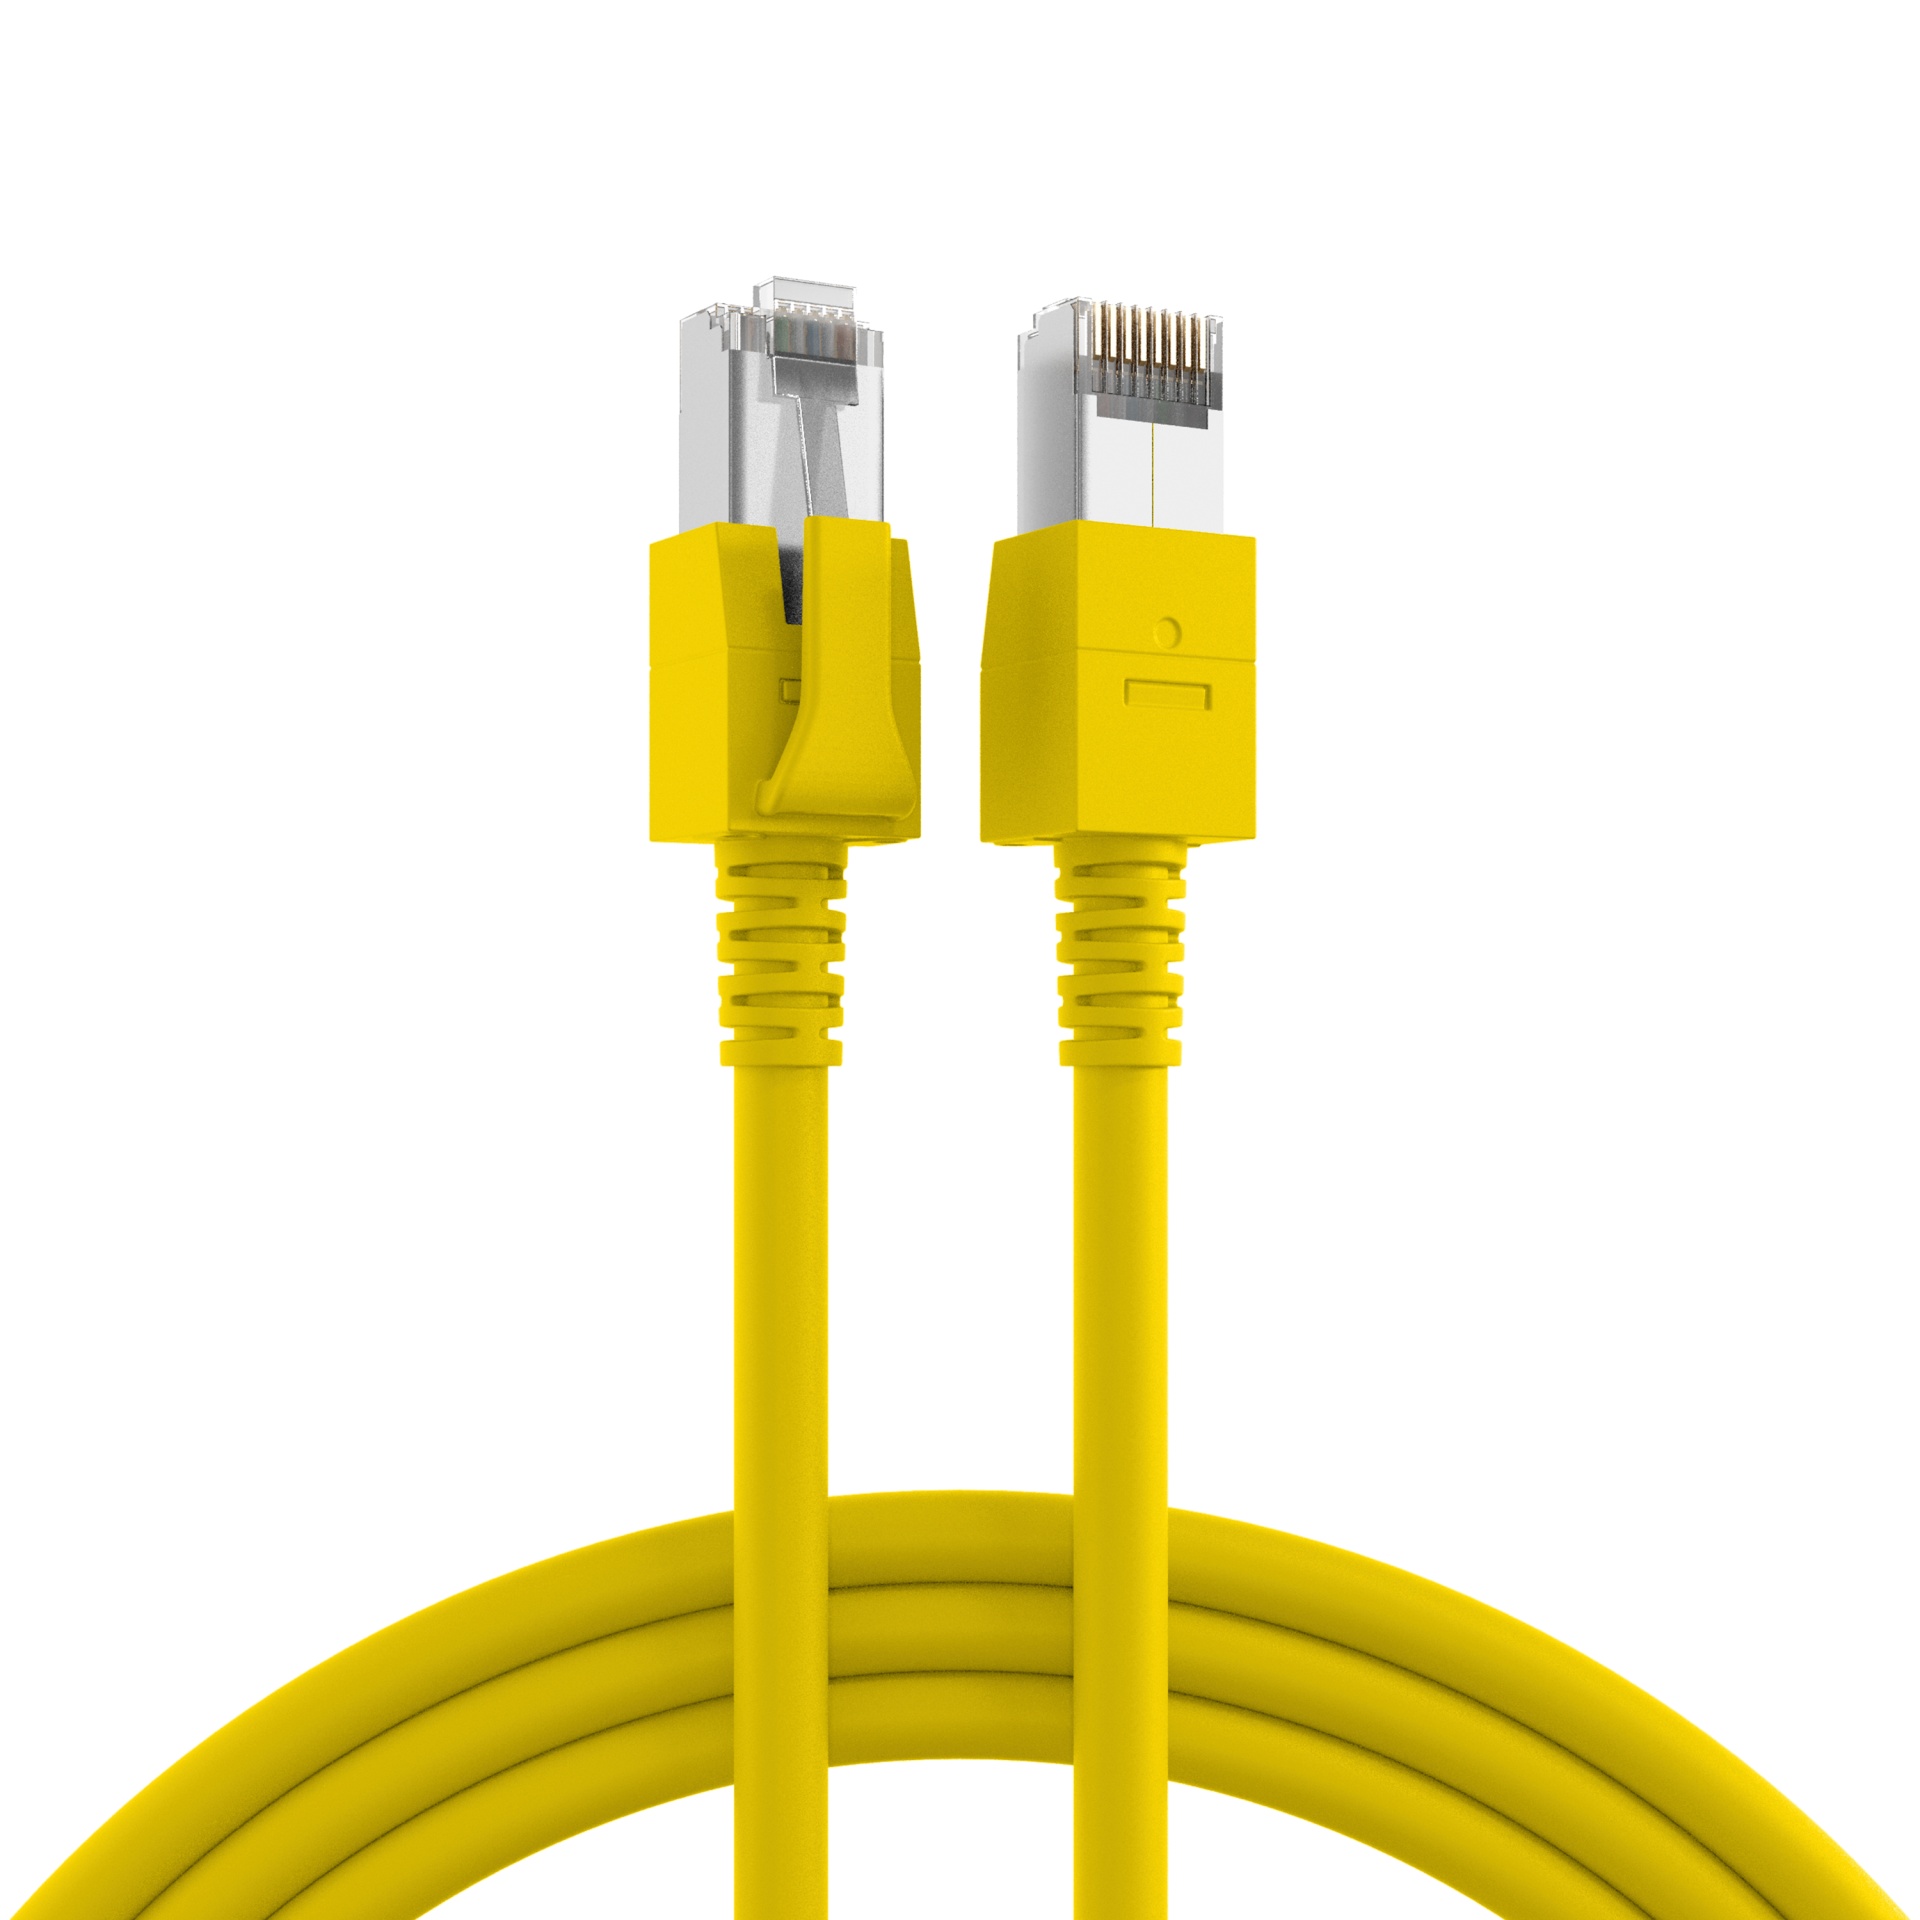 RJ45 Patch Cord Cat.6A S/FTP FRNC VC LED yellow 2m